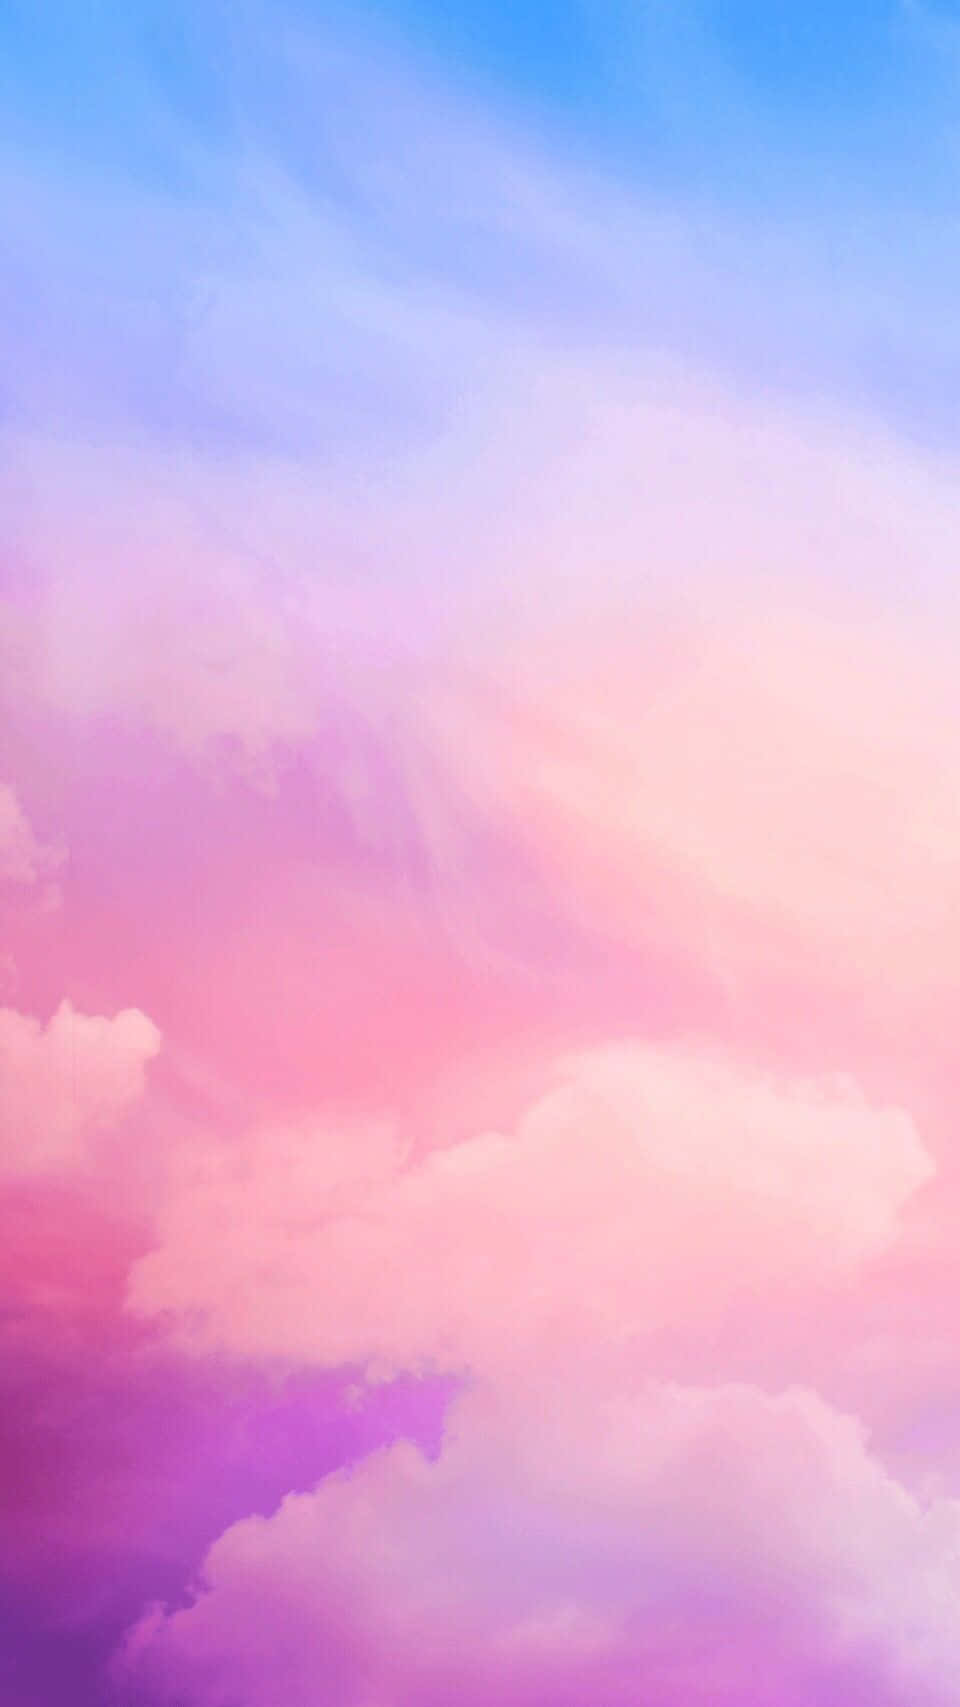 Pink And Blue Clouds In Sky Wallpaper